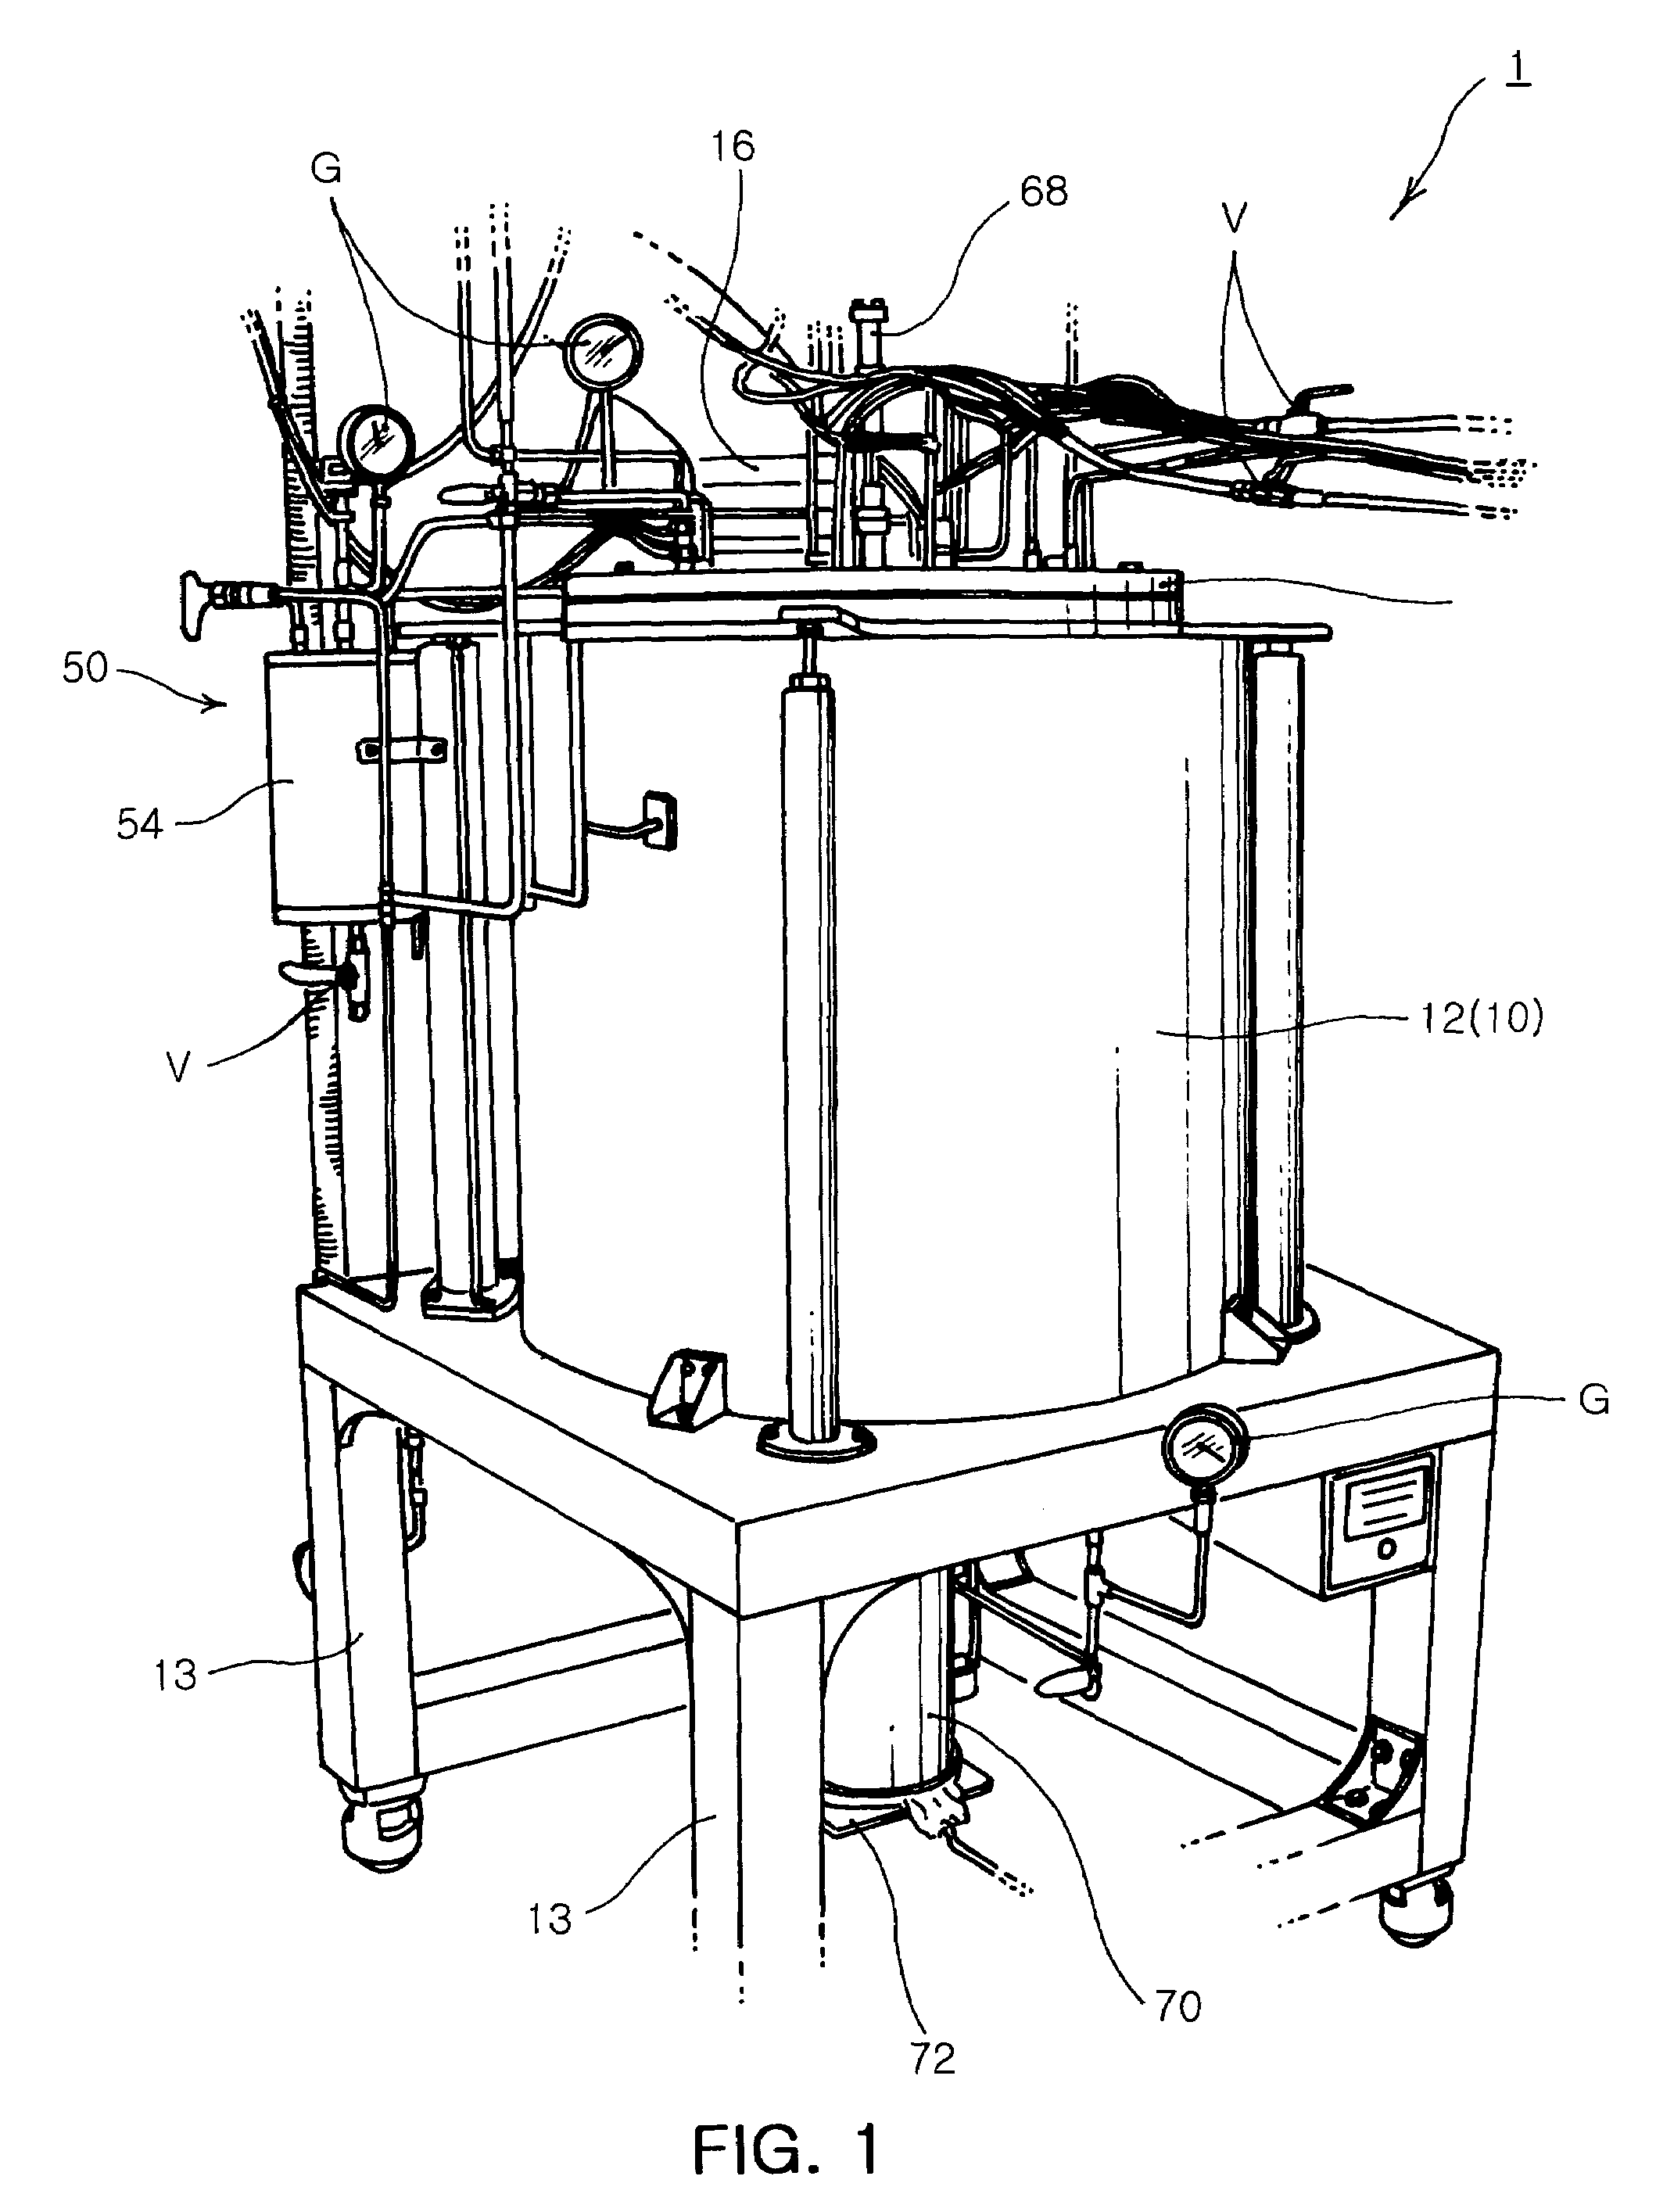 Apparatus for quantitative solidification of molten salt by using vacuum transfer and dual vessel